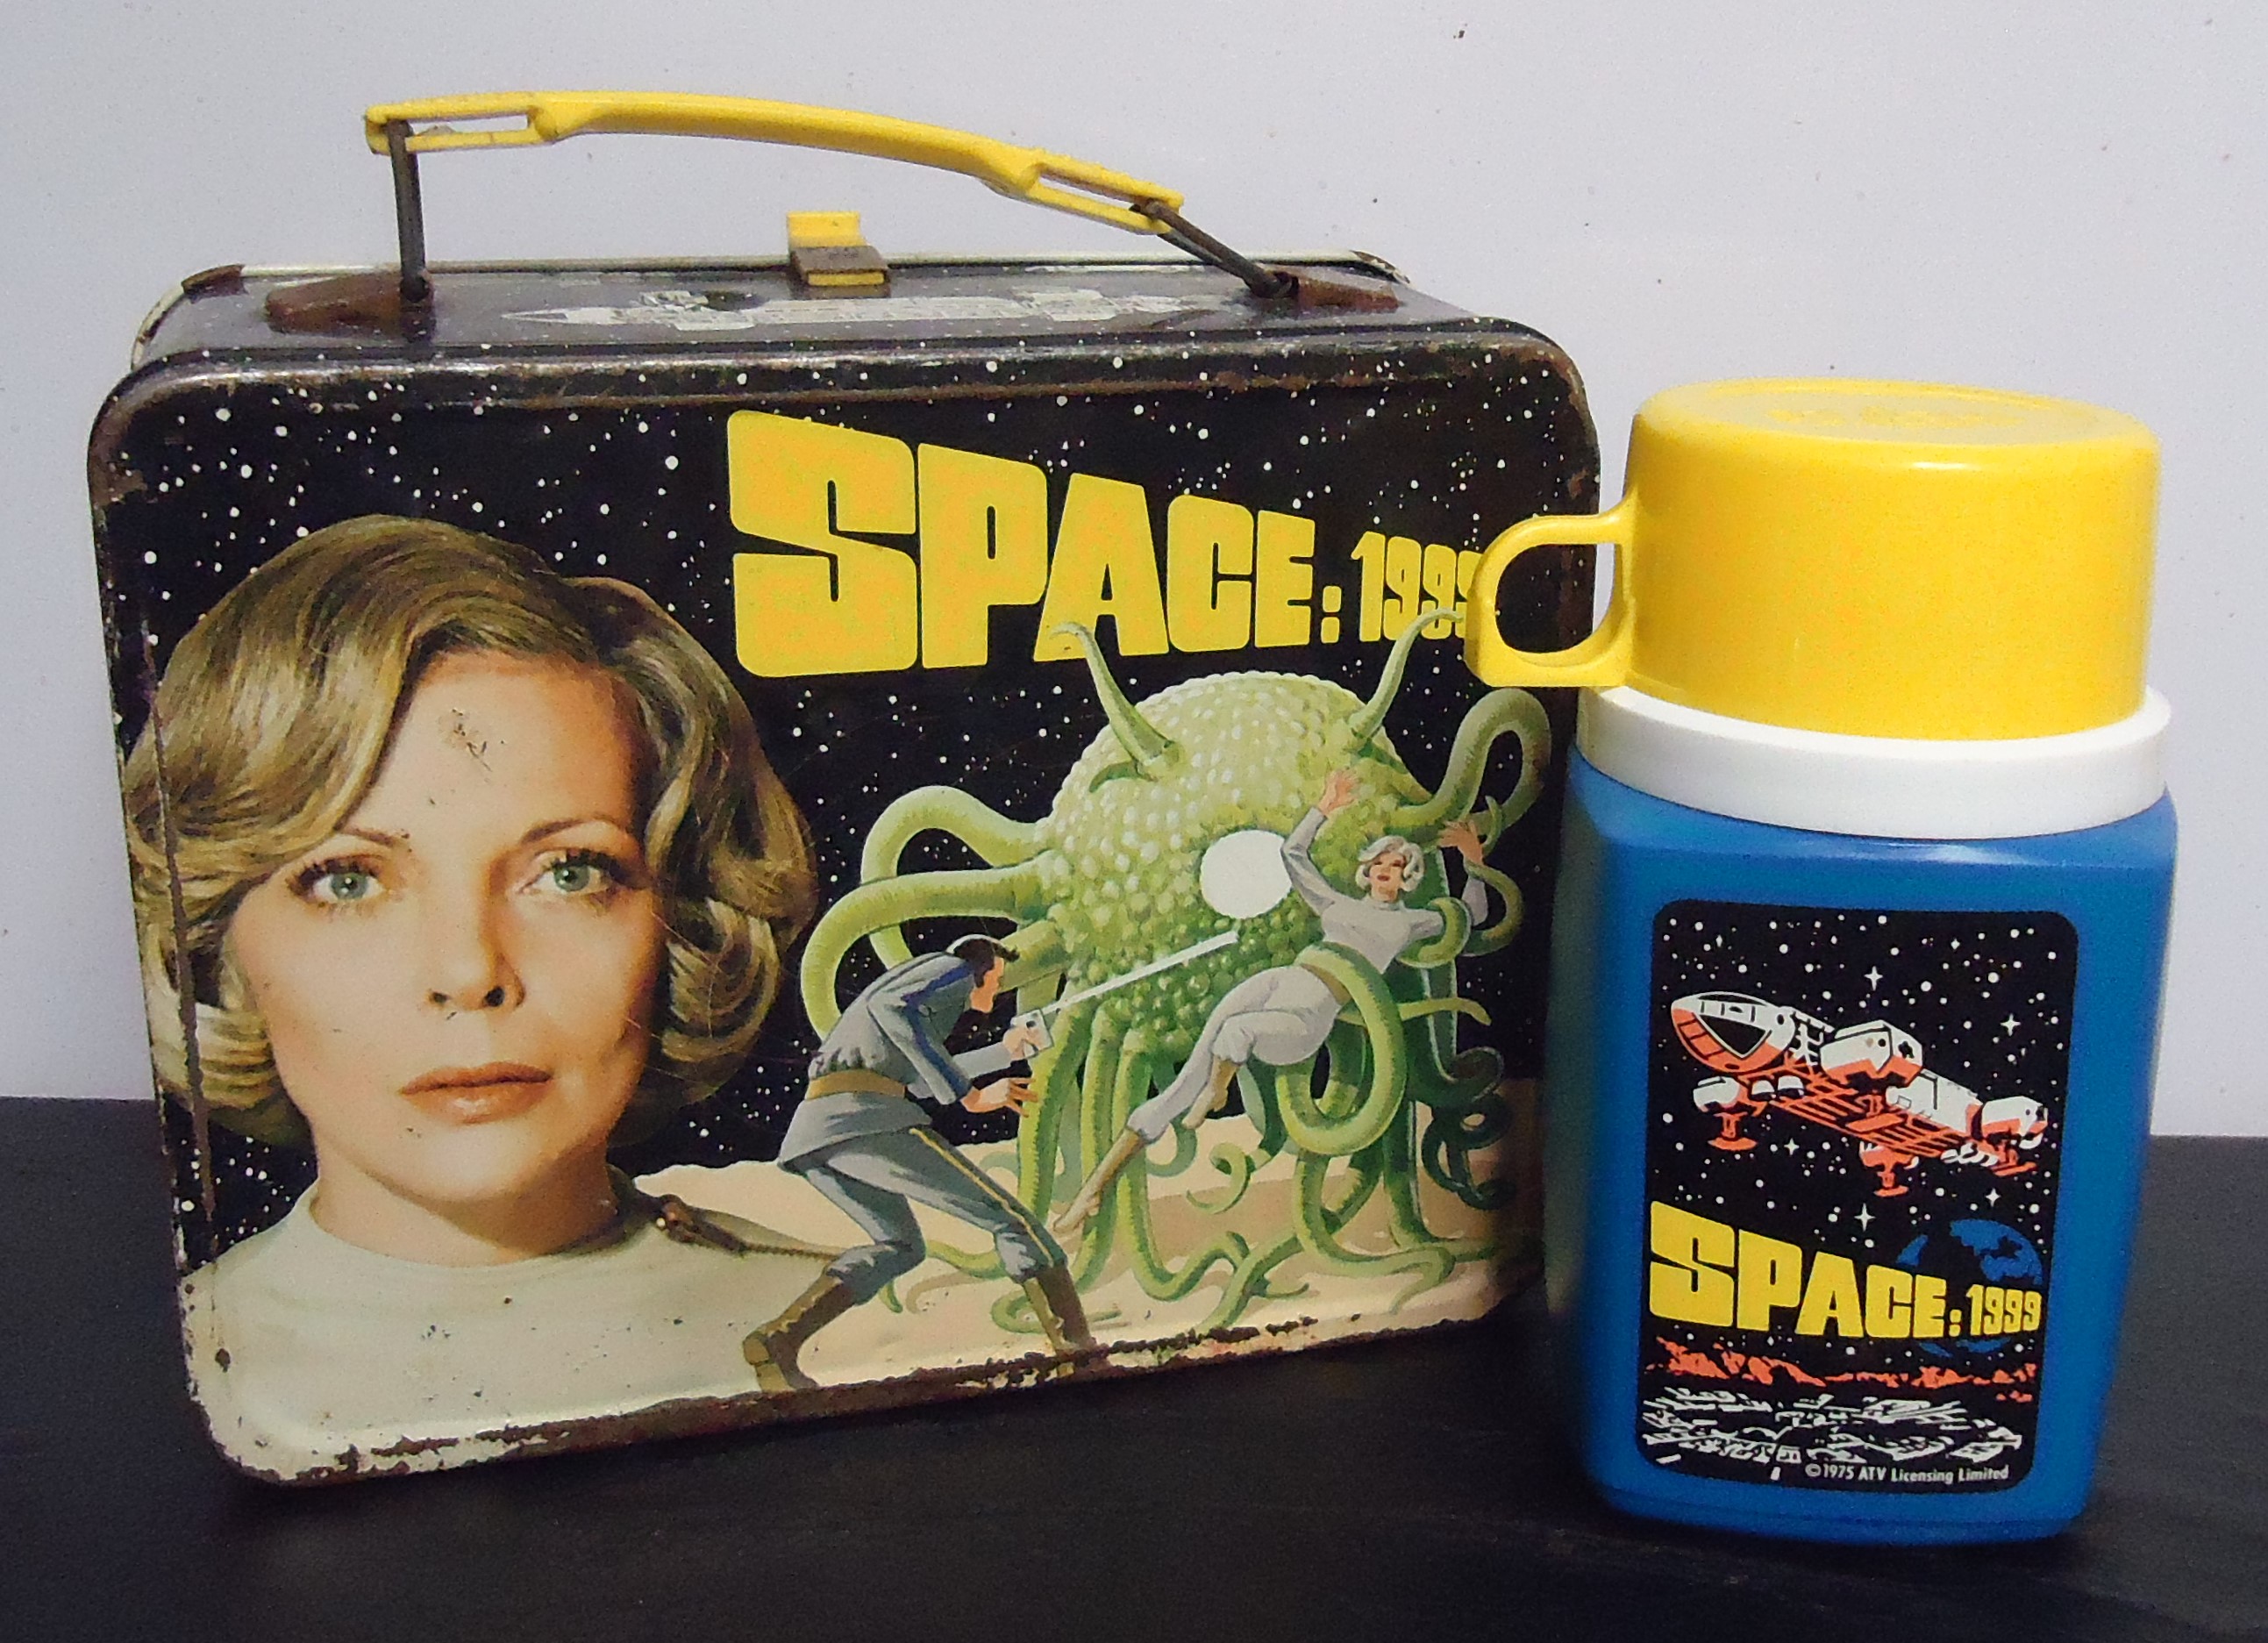 (20) "Space: 1999" Metal Lunch Box 
W/ Thermos
$58.00